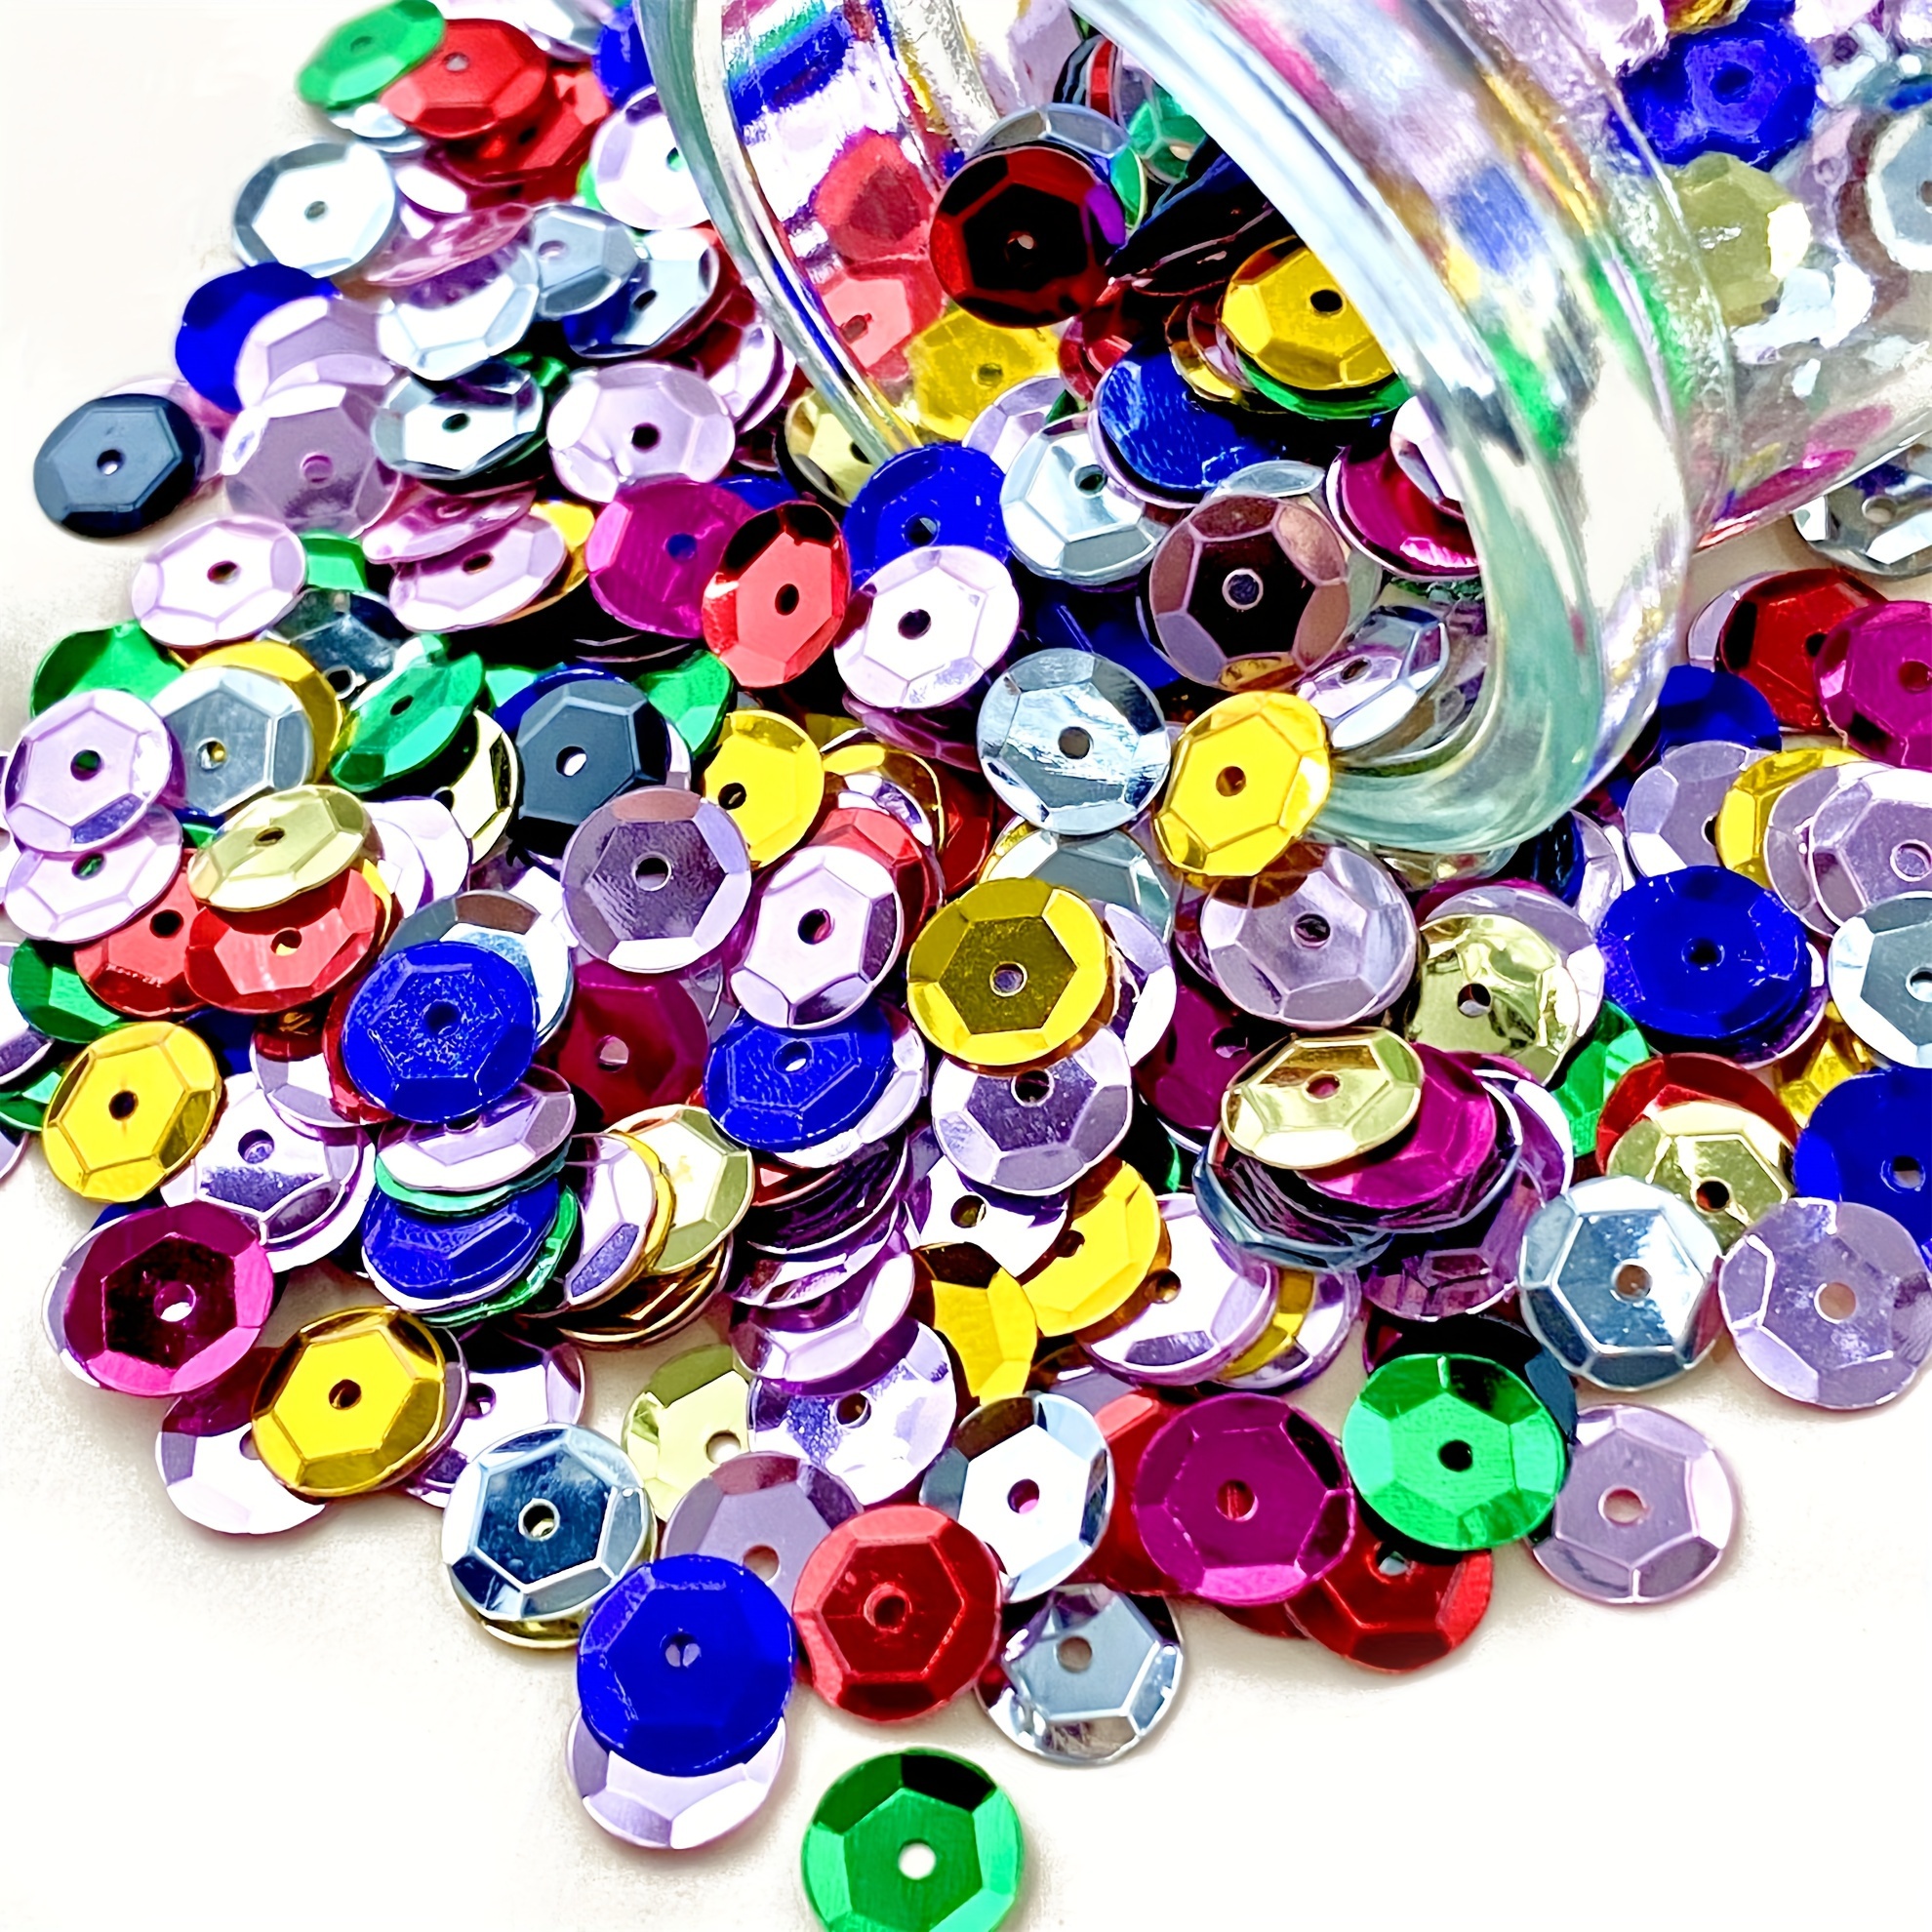 4000 Pieces Sequin Kit Paiettes Sequins Craft Loose Sequins Cup Iridescent  Spangles for DIY Crafts Making Sewing Sticking Threading Shiny Decorative